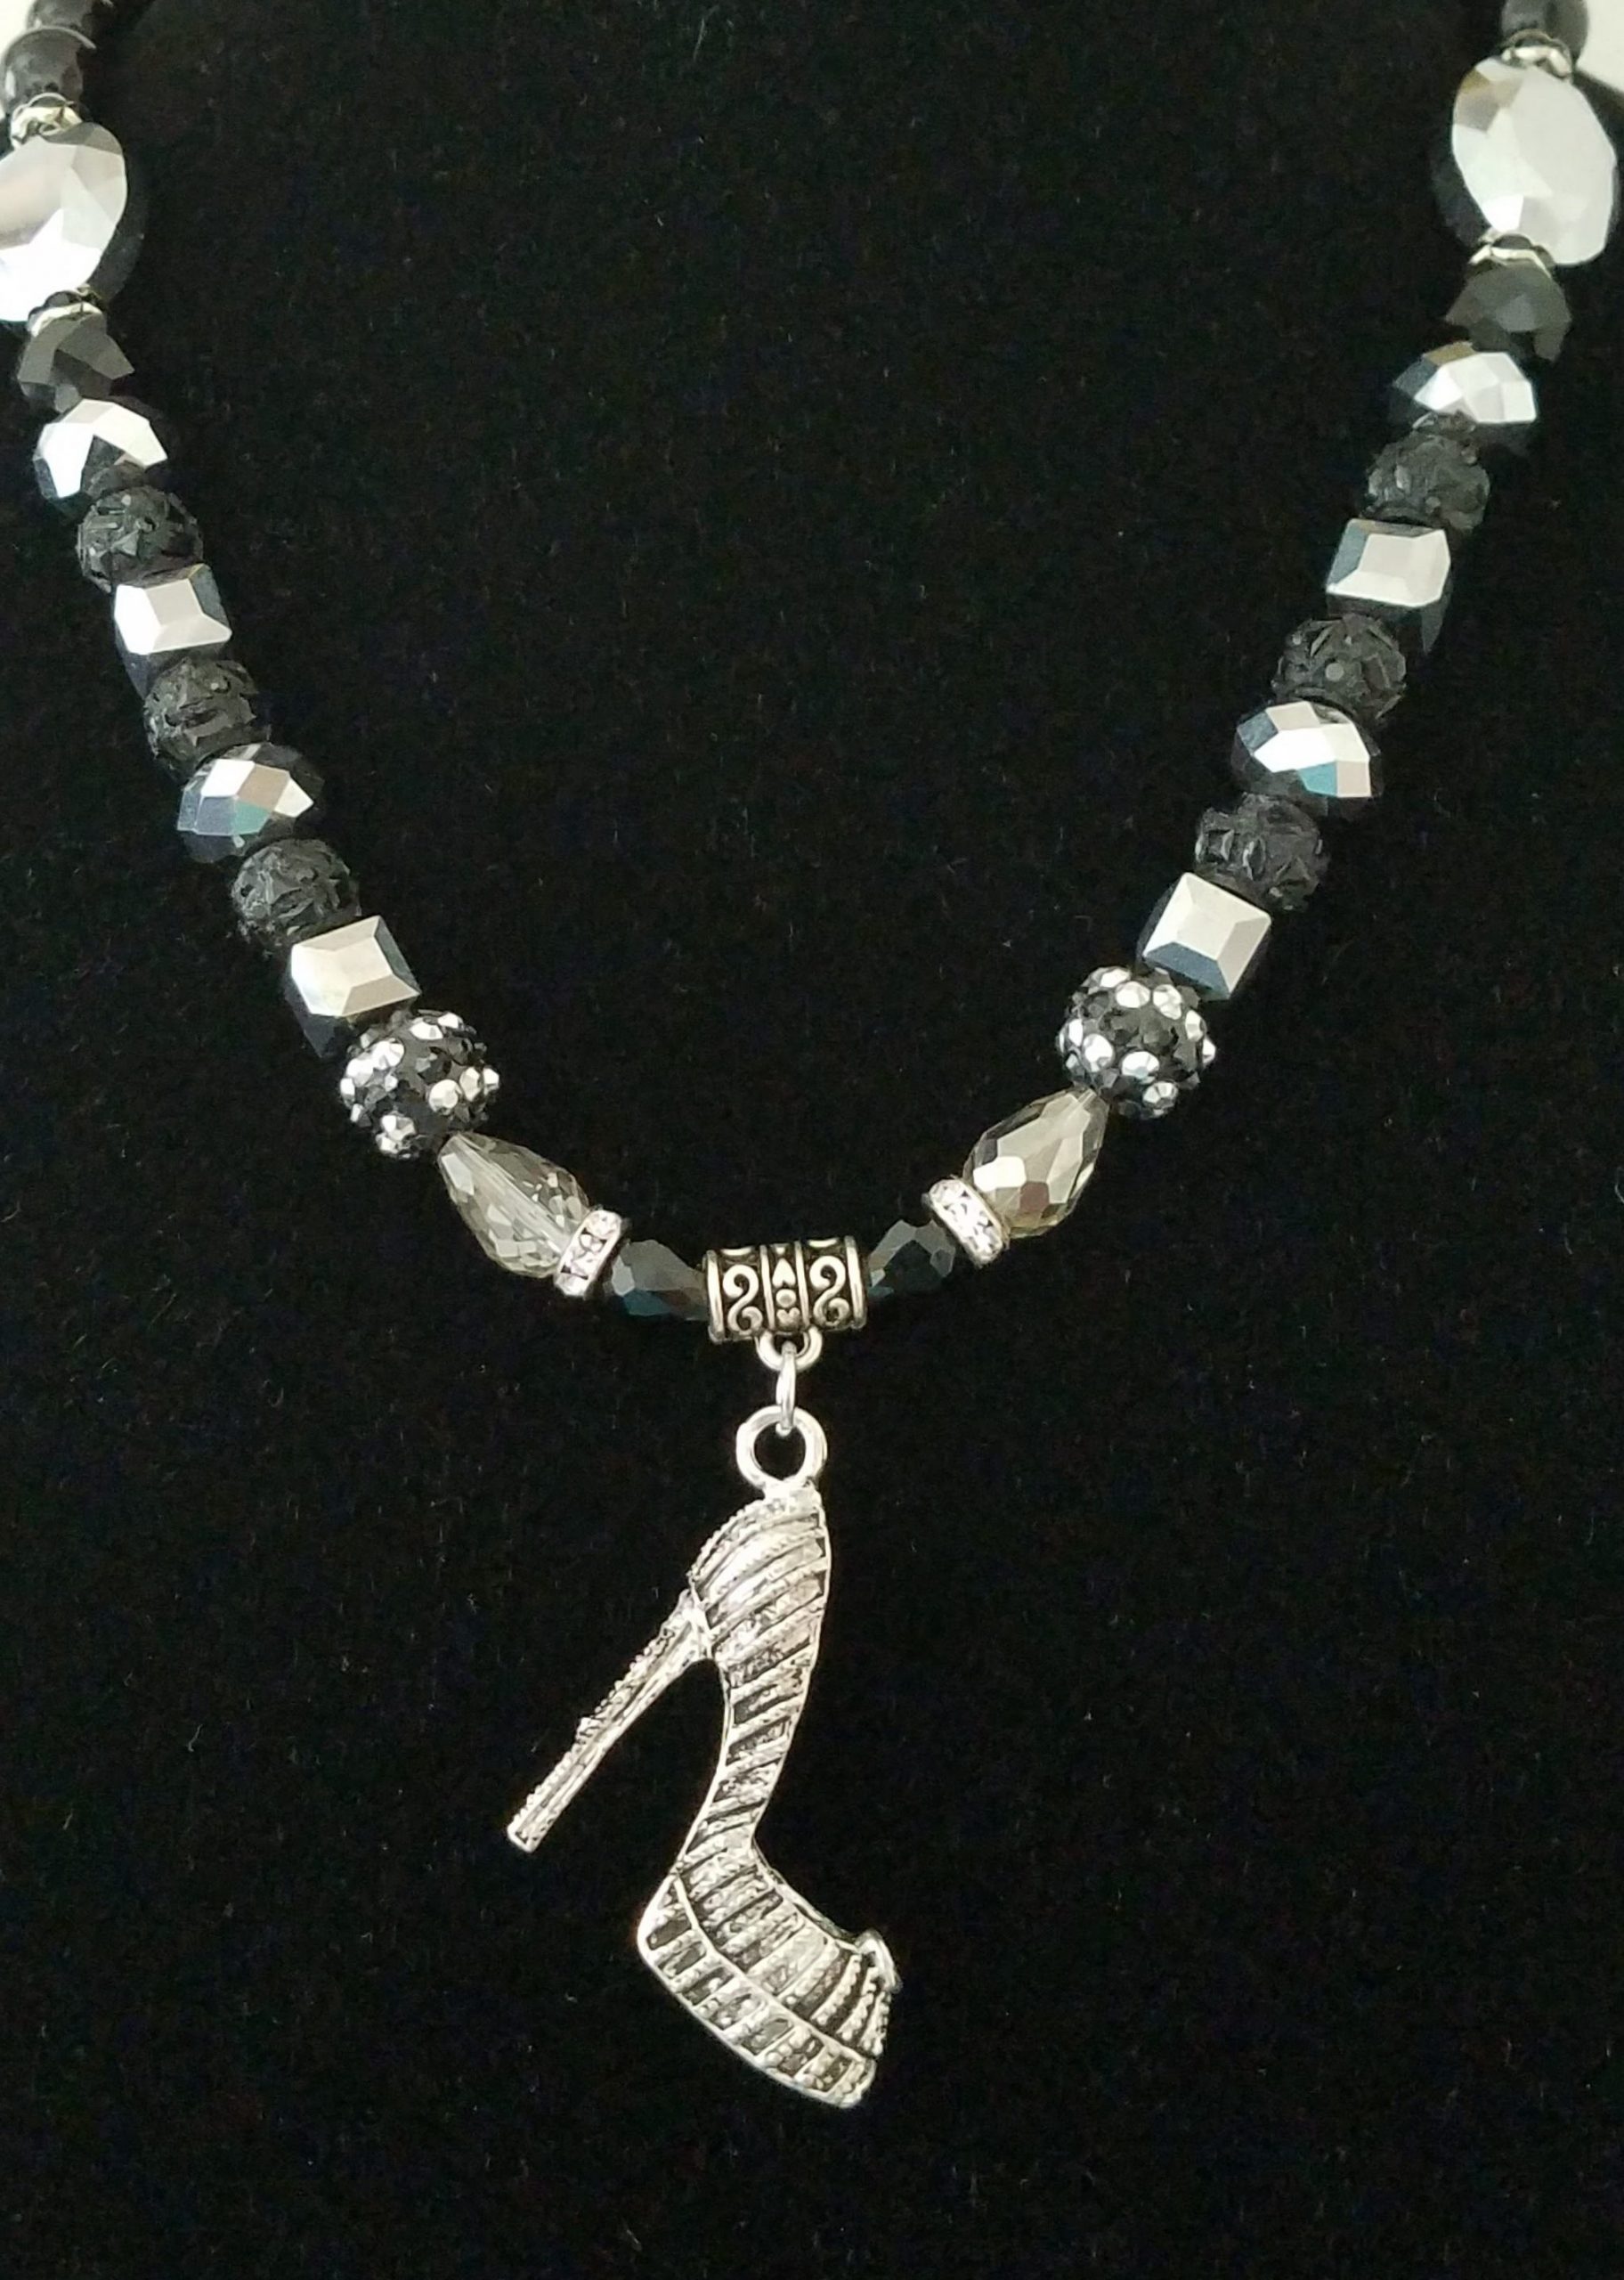 Black and Silver necklace